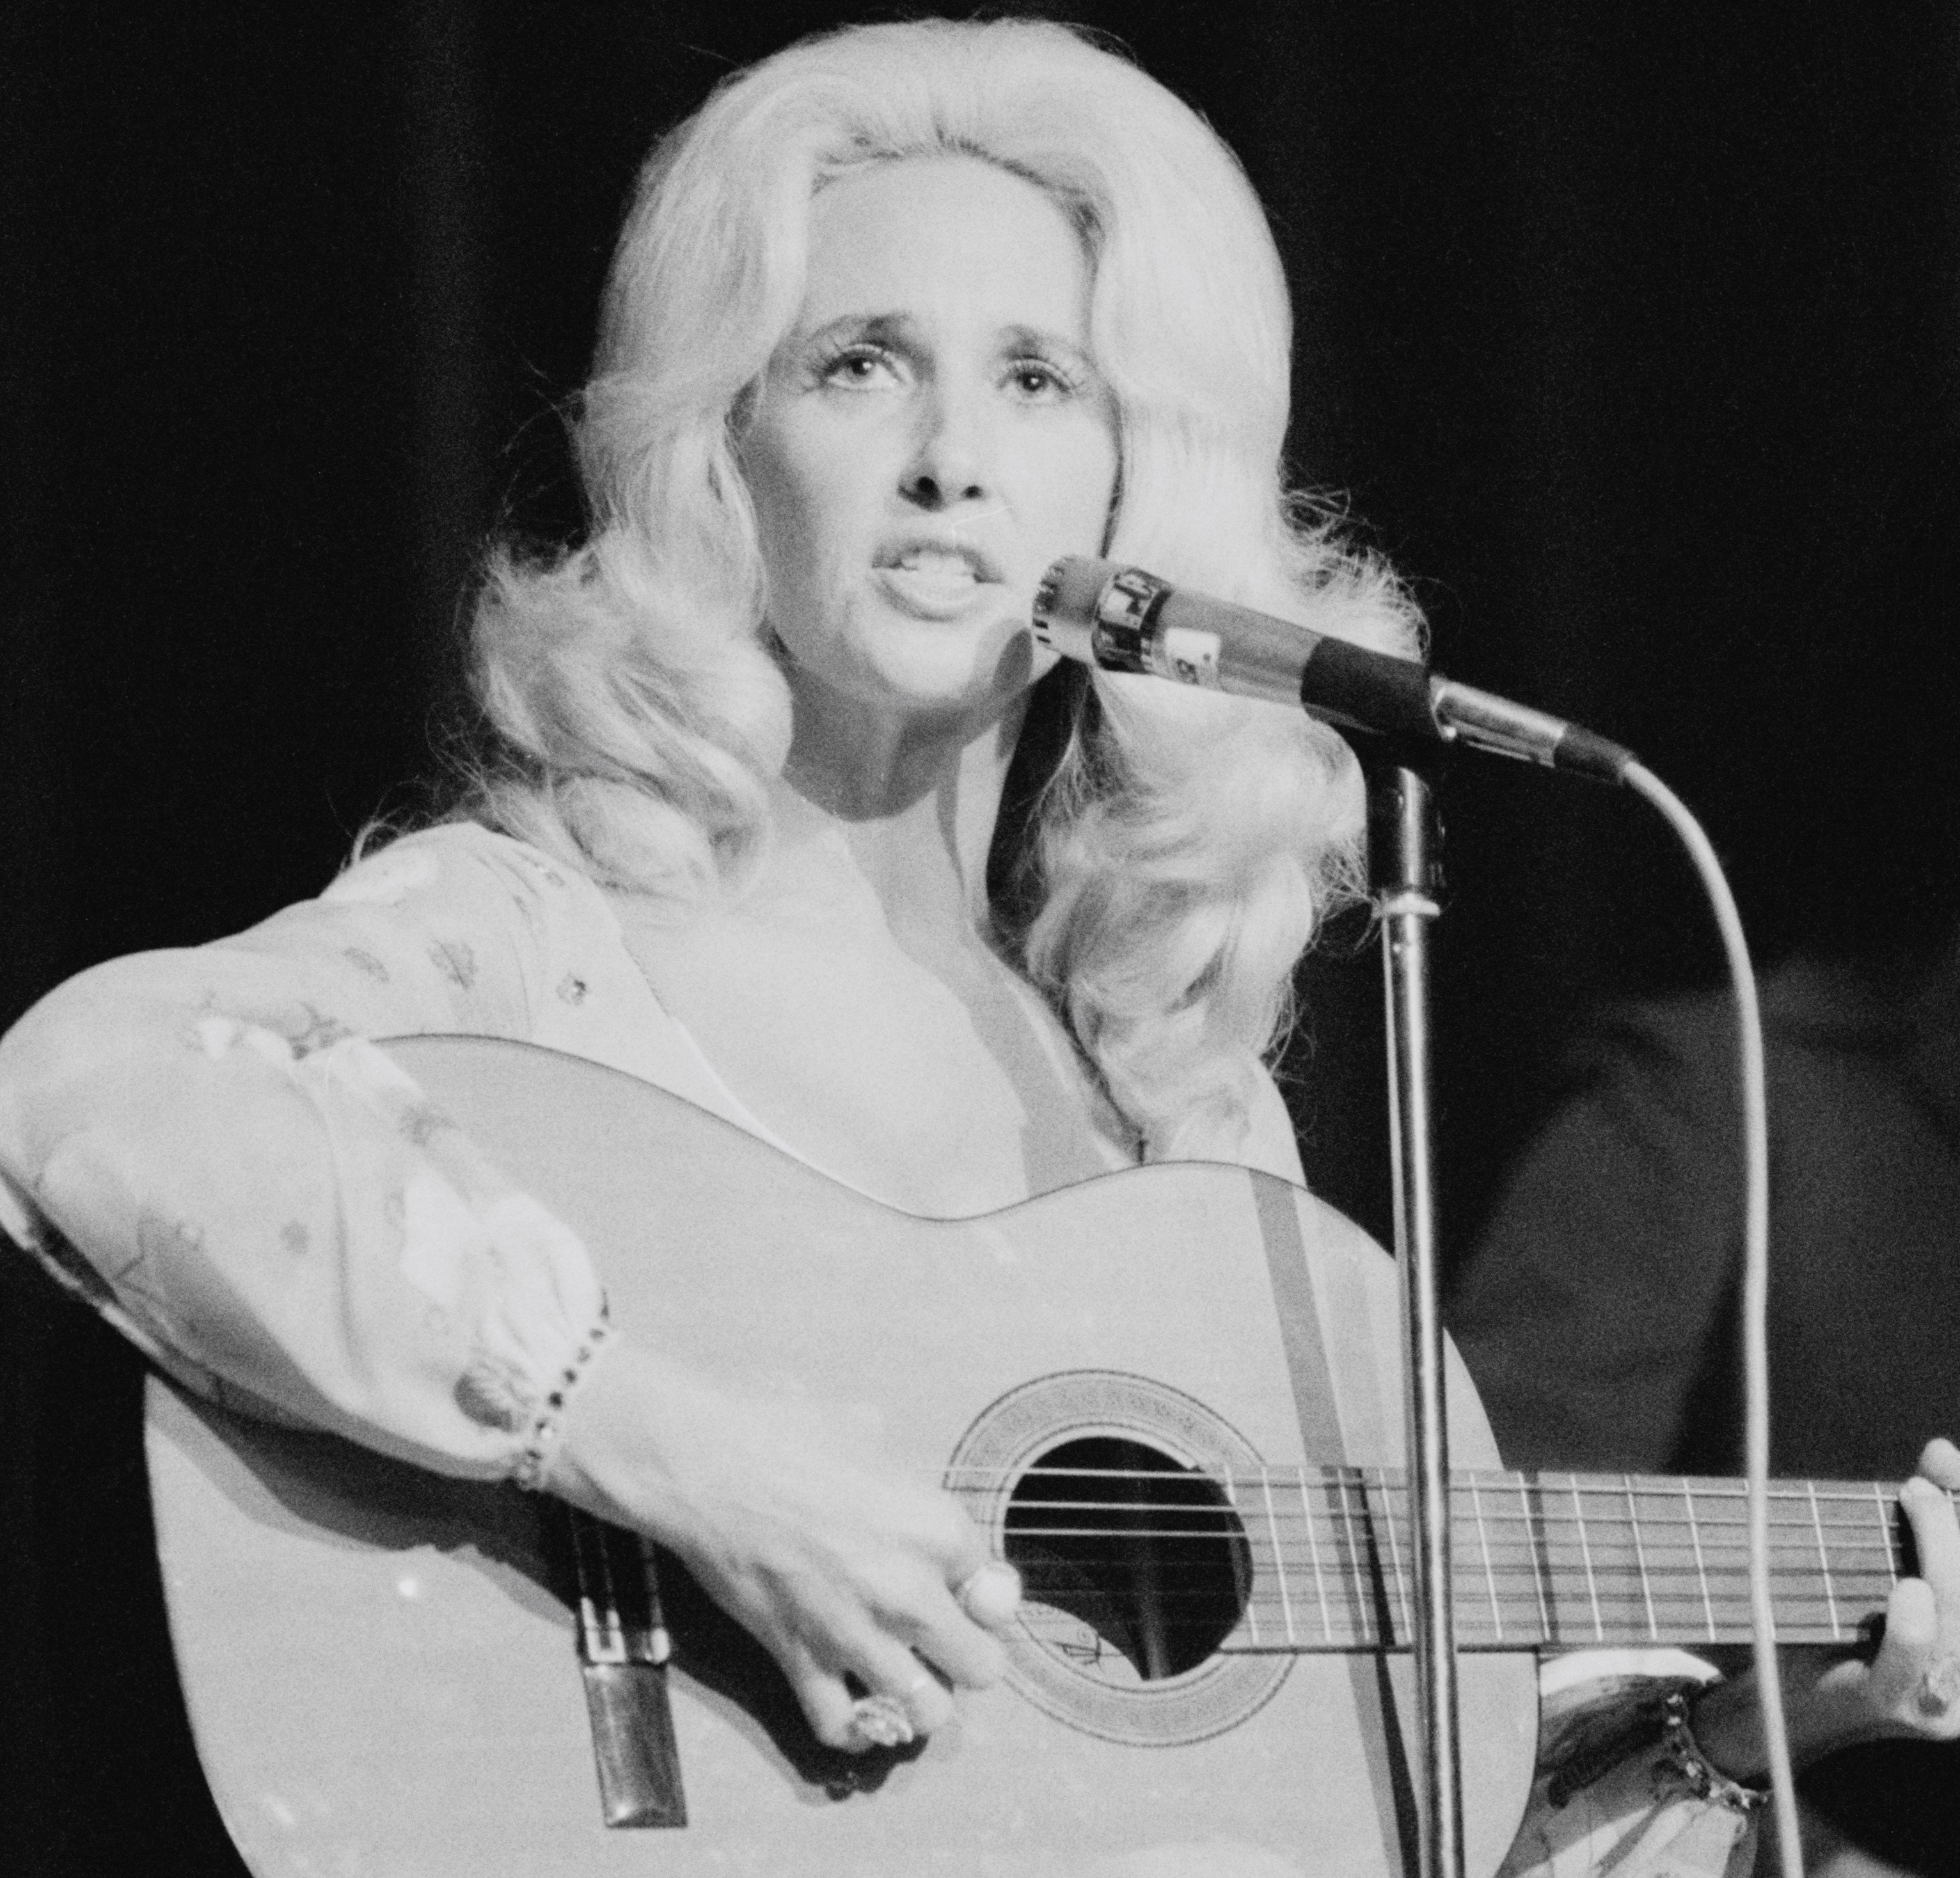 Why Tammy Wynette's 'Stand by Your Man' Was So Controversial